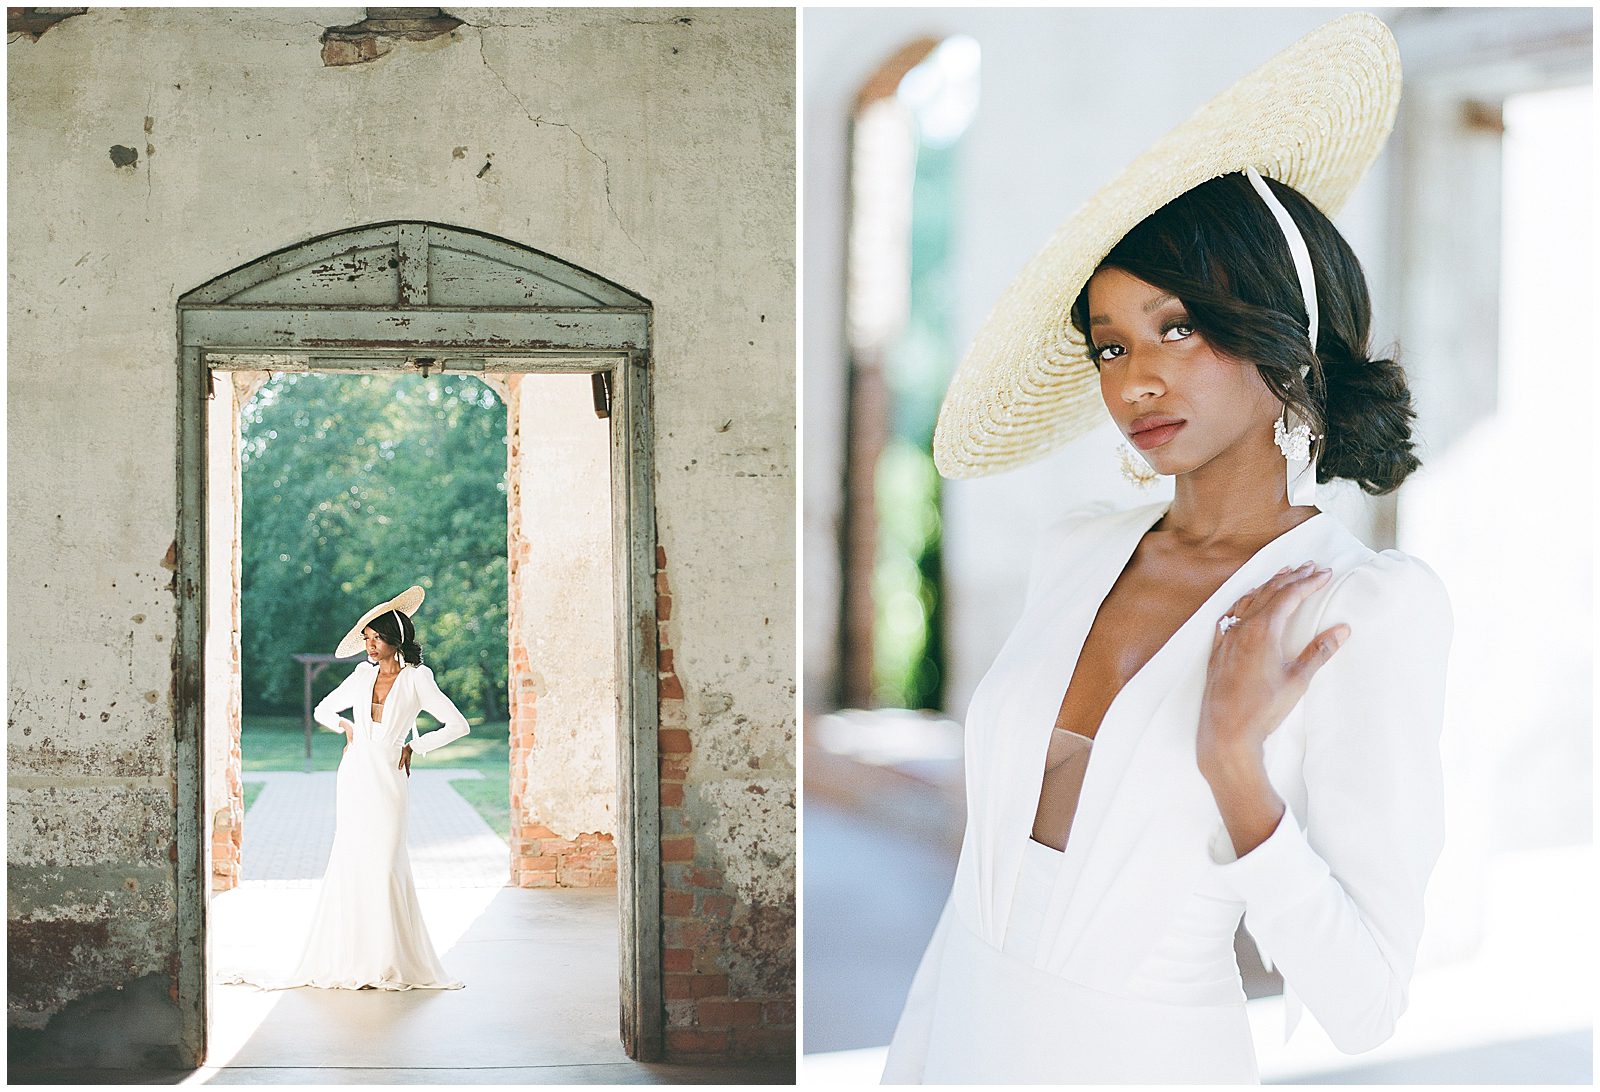 Bride in Straw Hat In Doorway and Looking at Camera photos